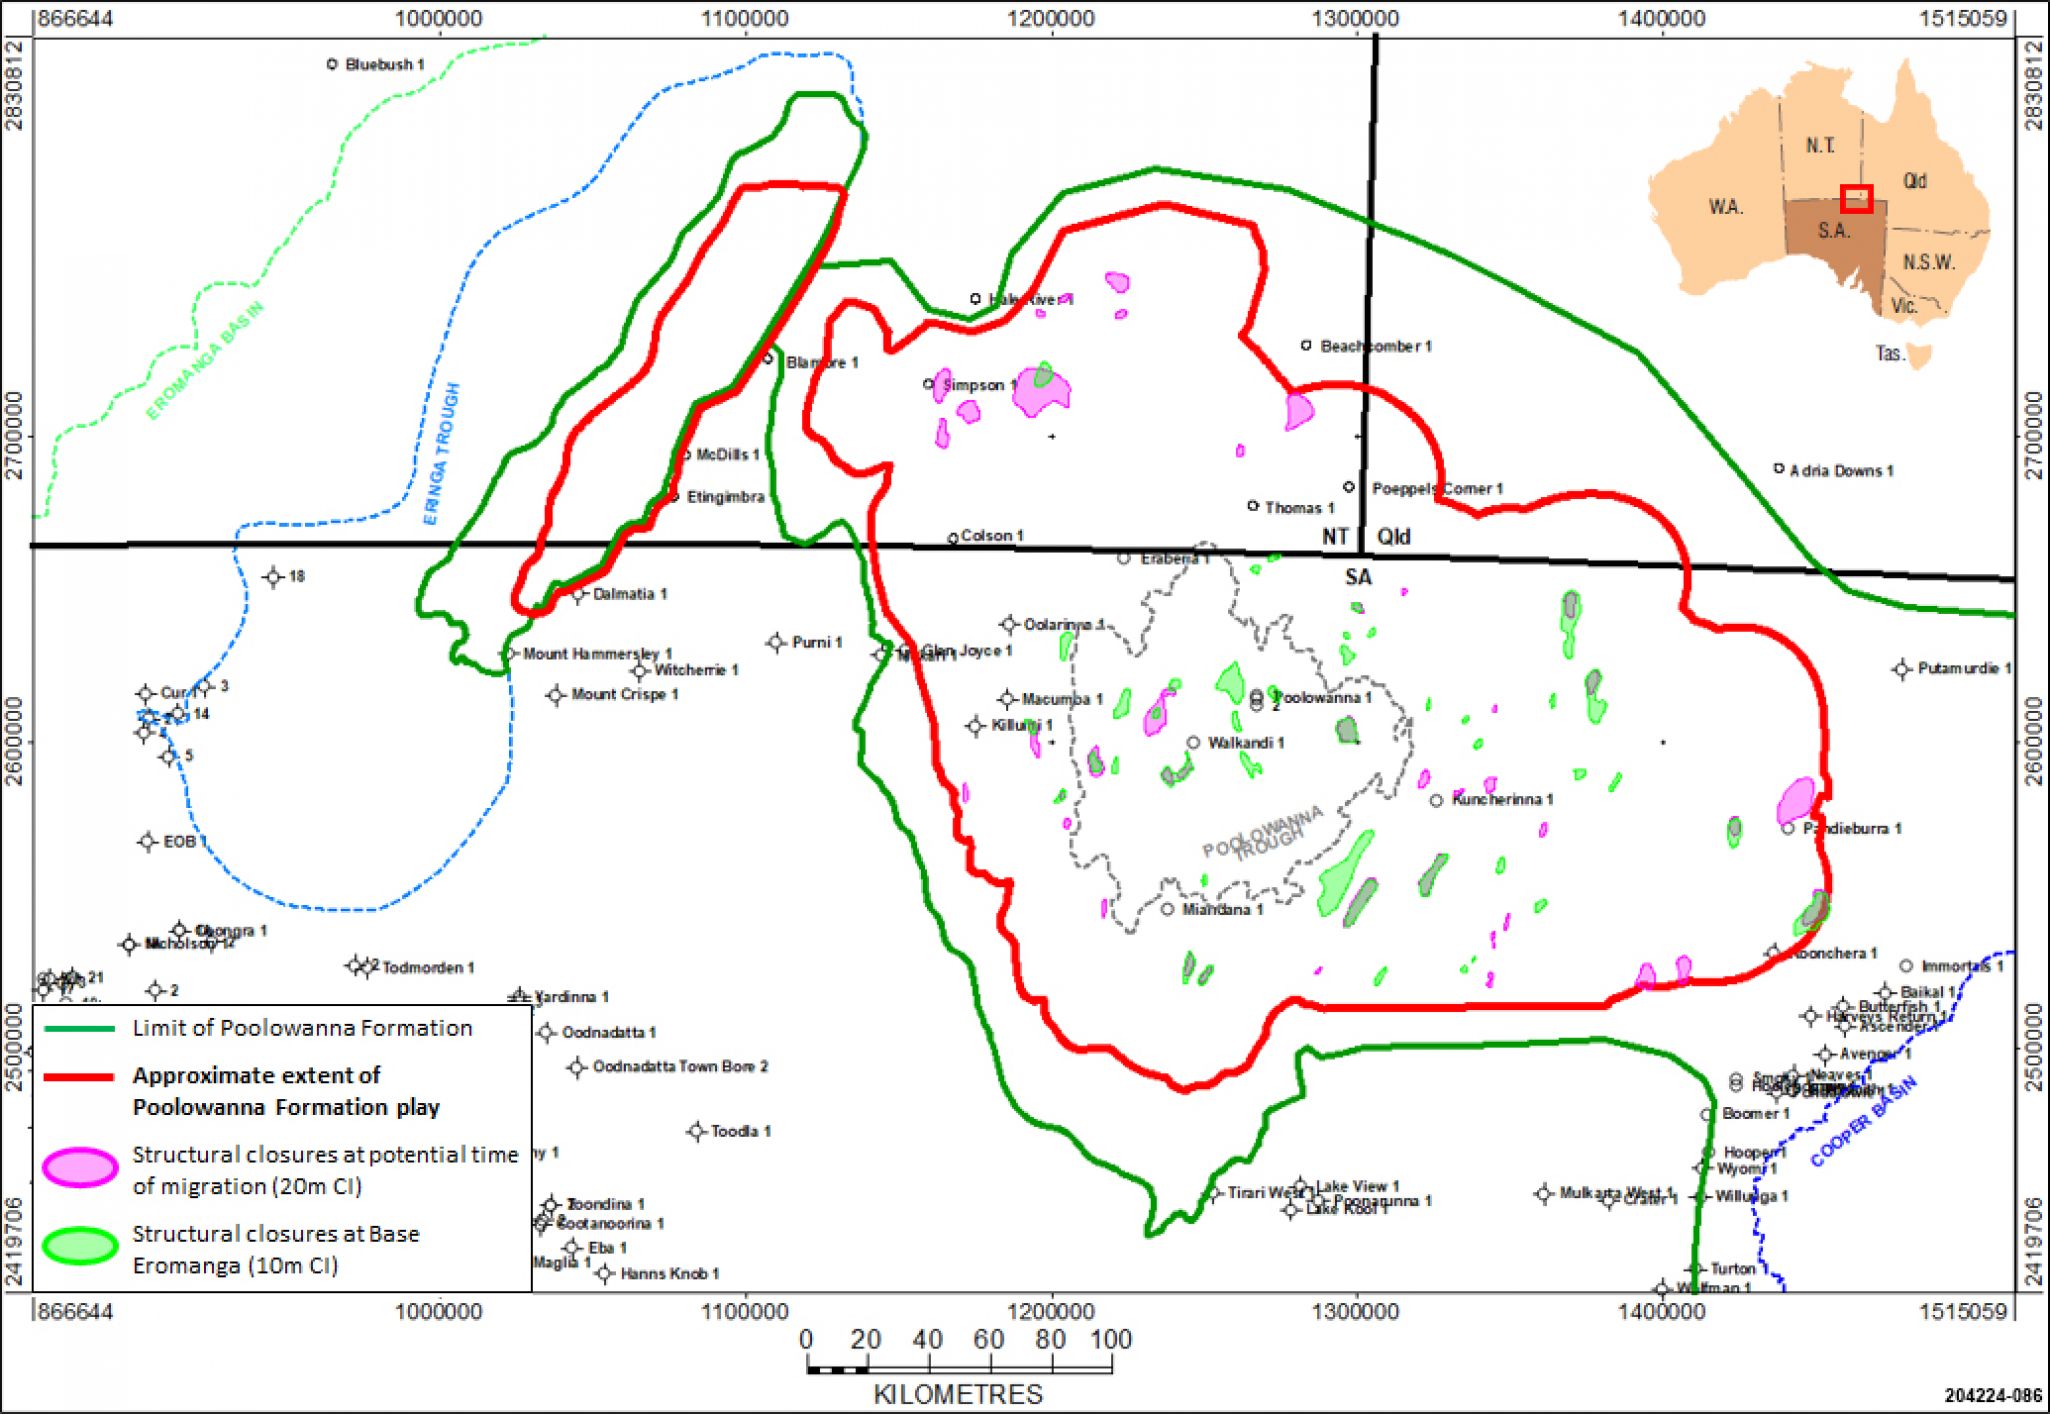 Structures within the Poolowanna Formation play area at time of hydrocarbon migration (pink) and Present Day (green)